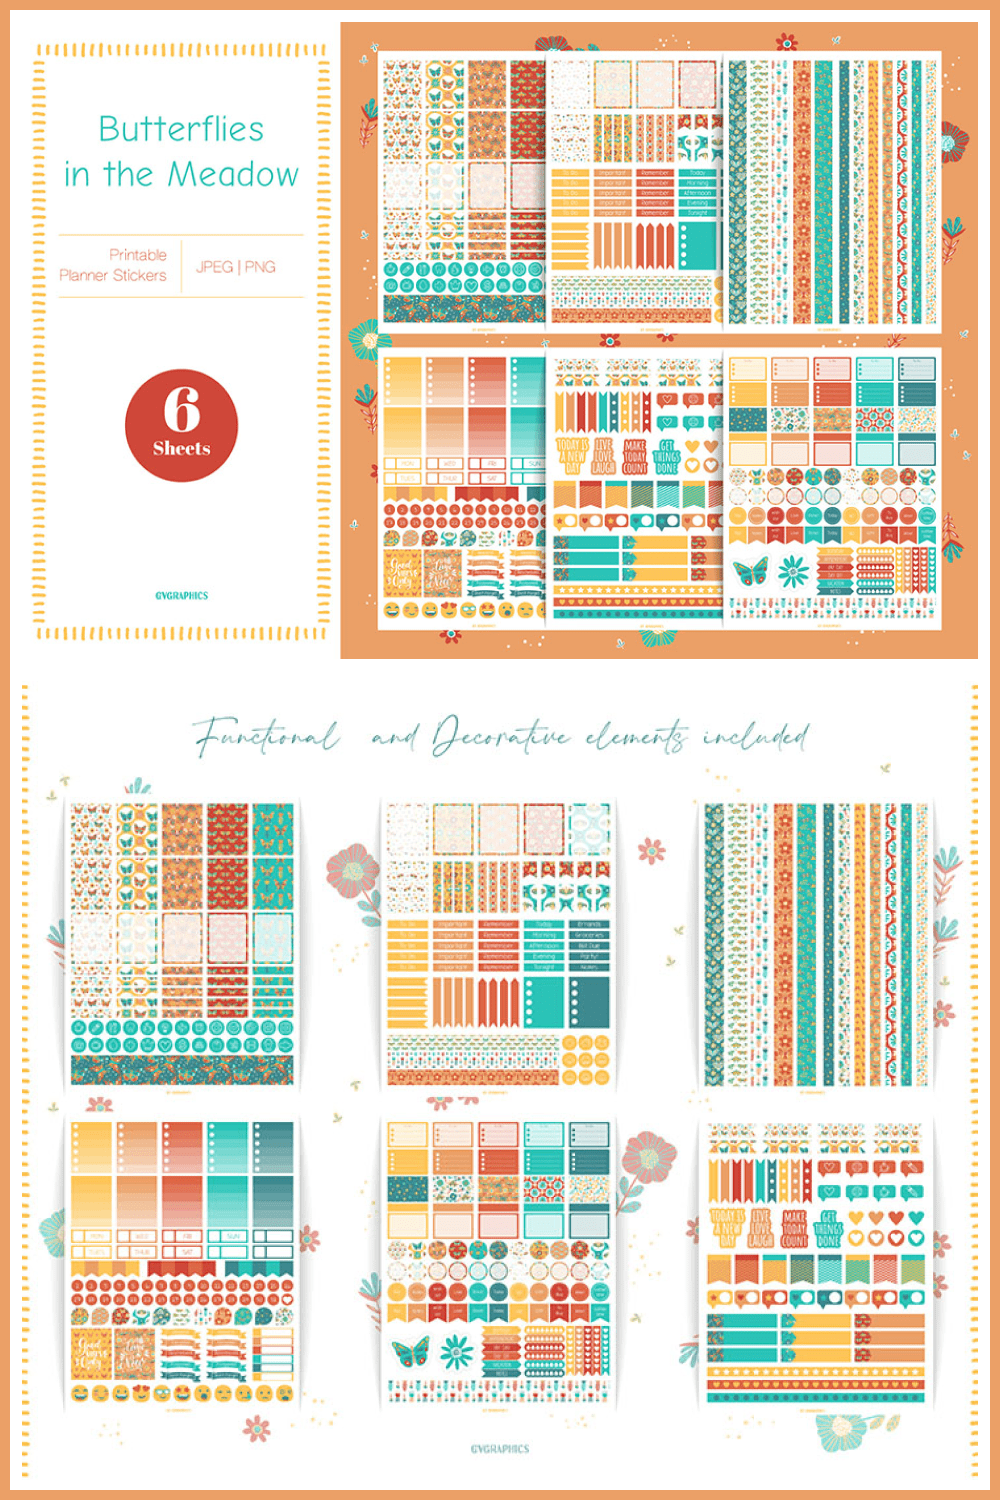 Butterflies in the Meadow Planner Stickers - MasterBundles - Pinterest Collage Image.